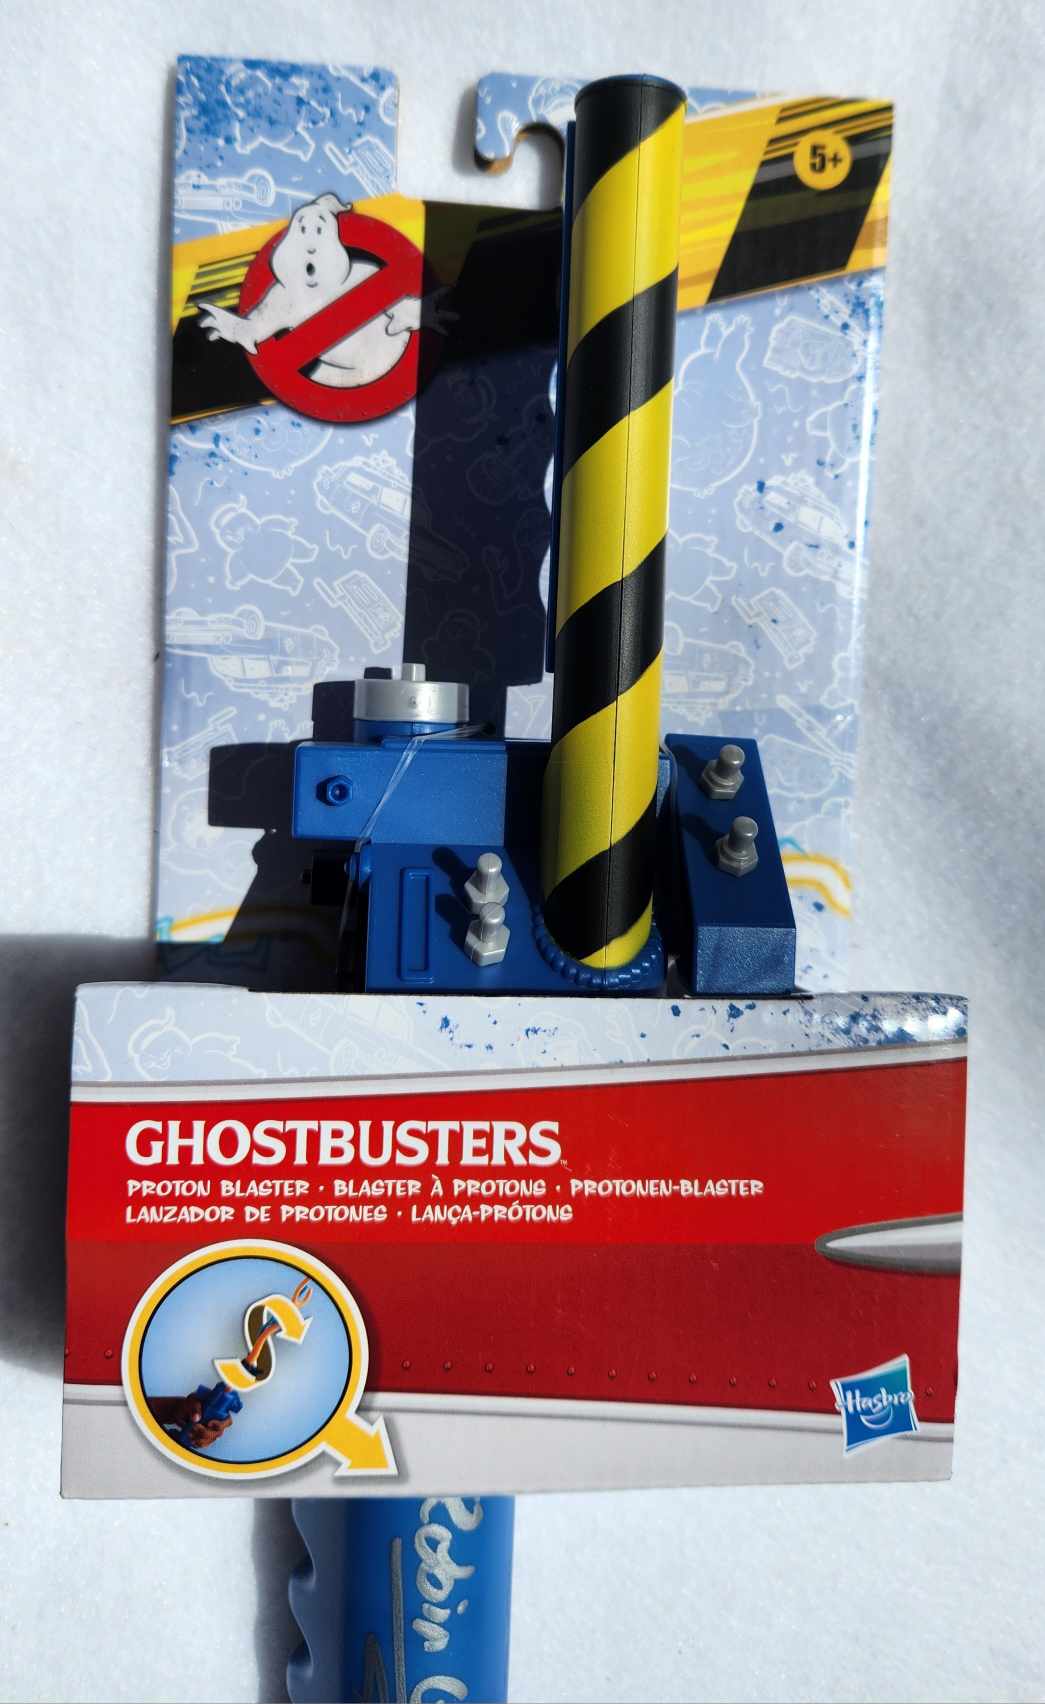 Signed "Ghostbusters" Proton Blaster